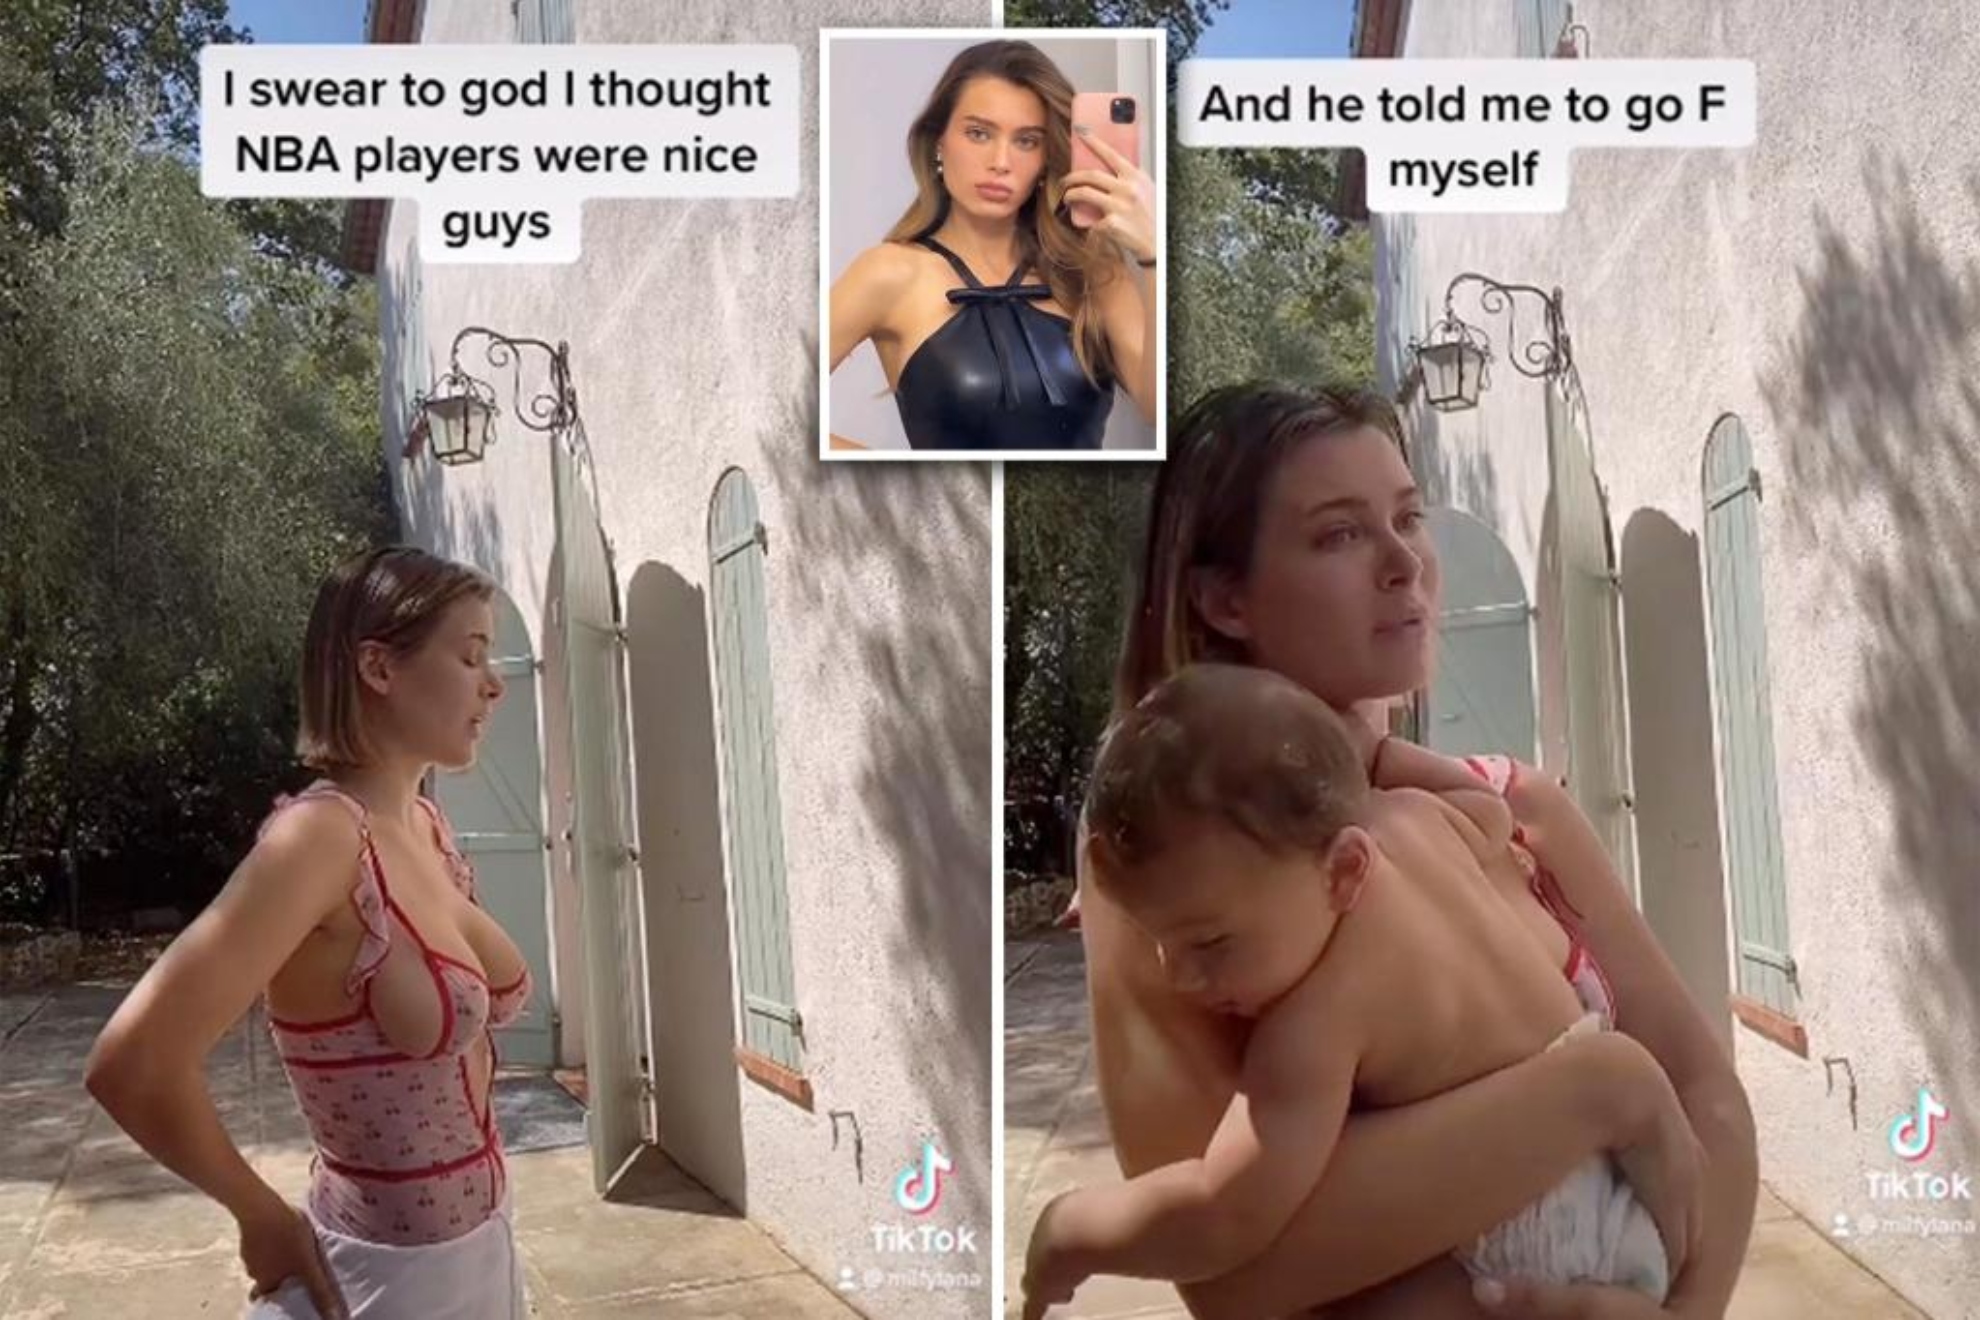 christopher bilbrey recommends lana rhoades blackmail pic